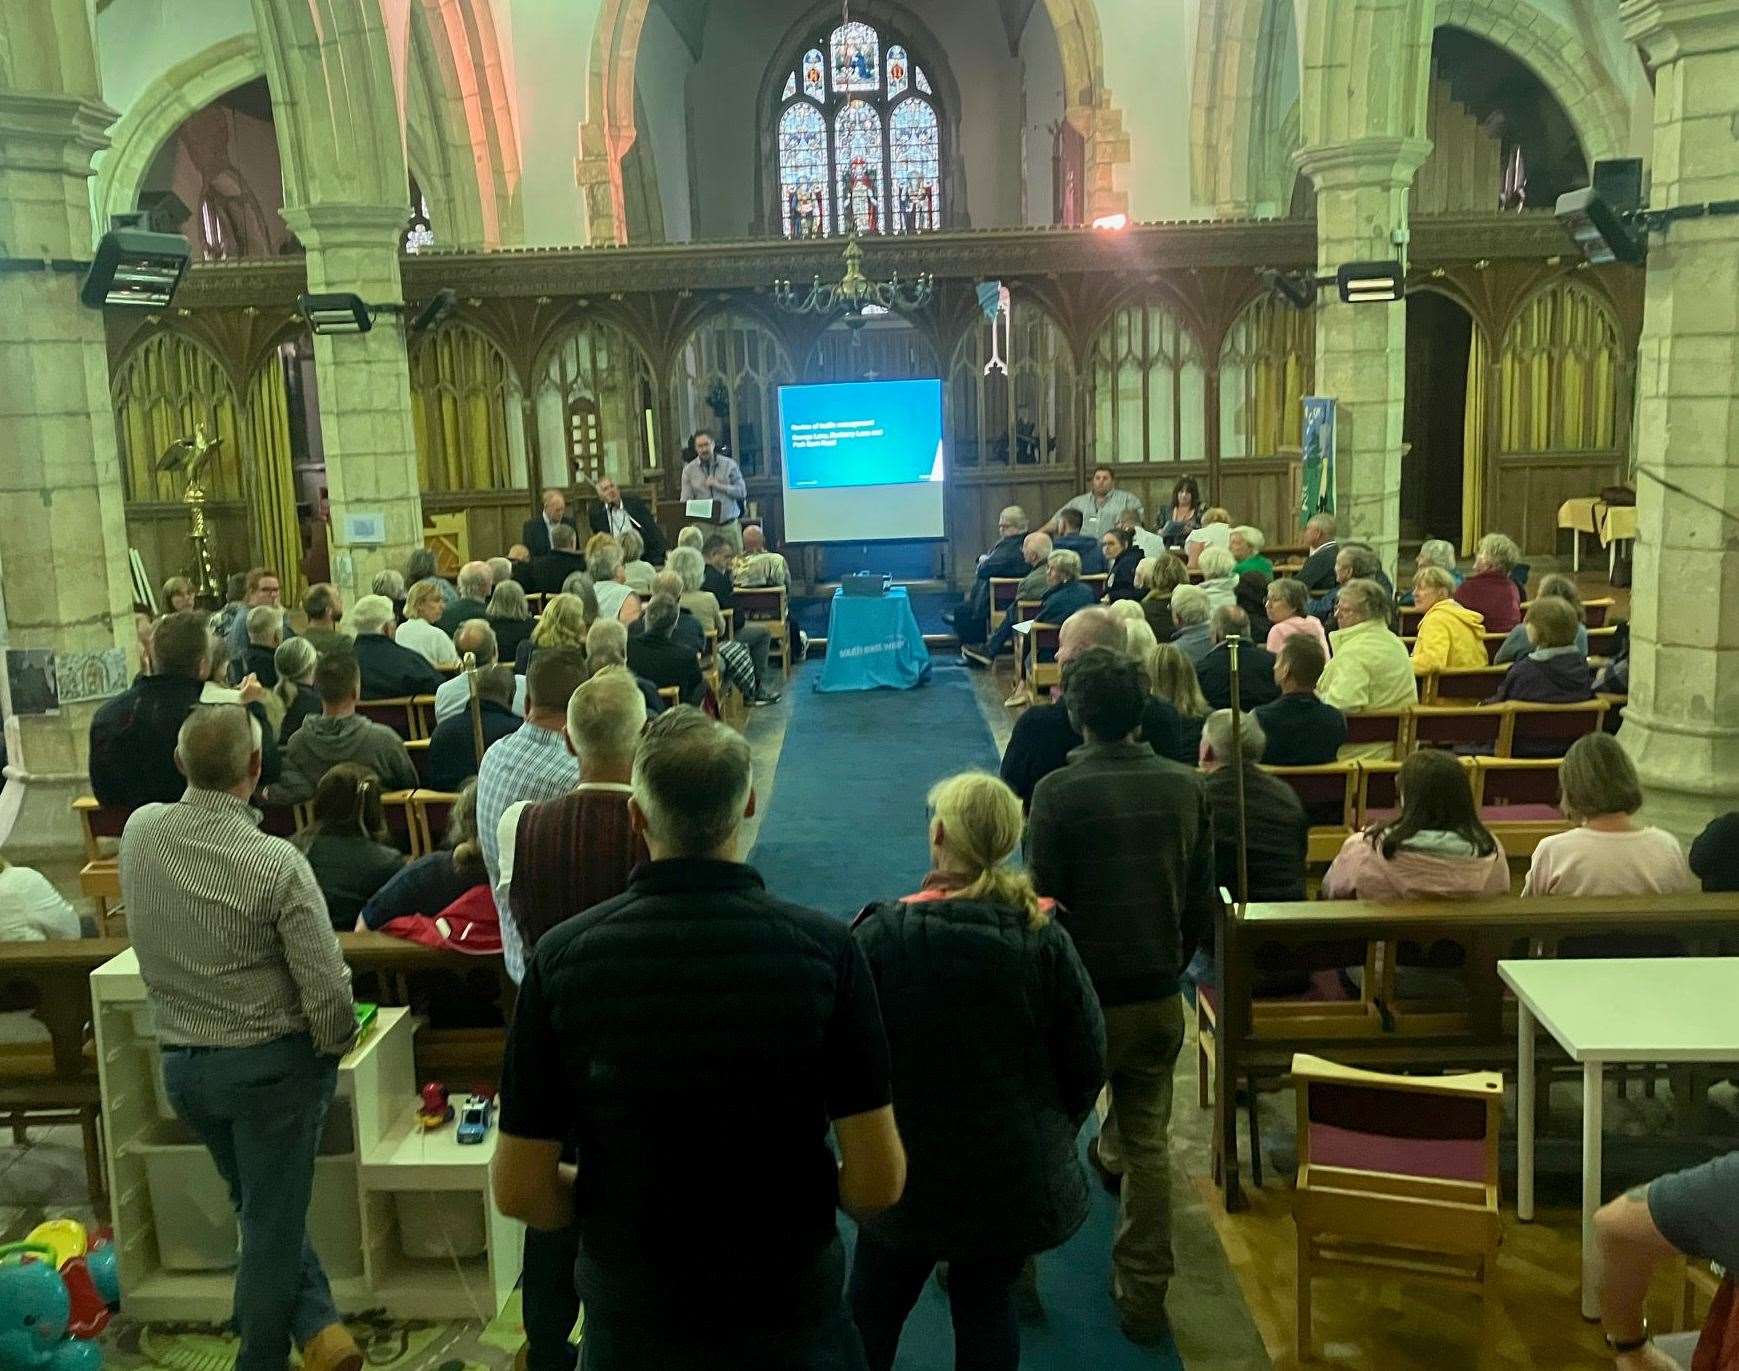 More than 120 residents attended the public meeting in Leeds on August 8 about the road closures in the village